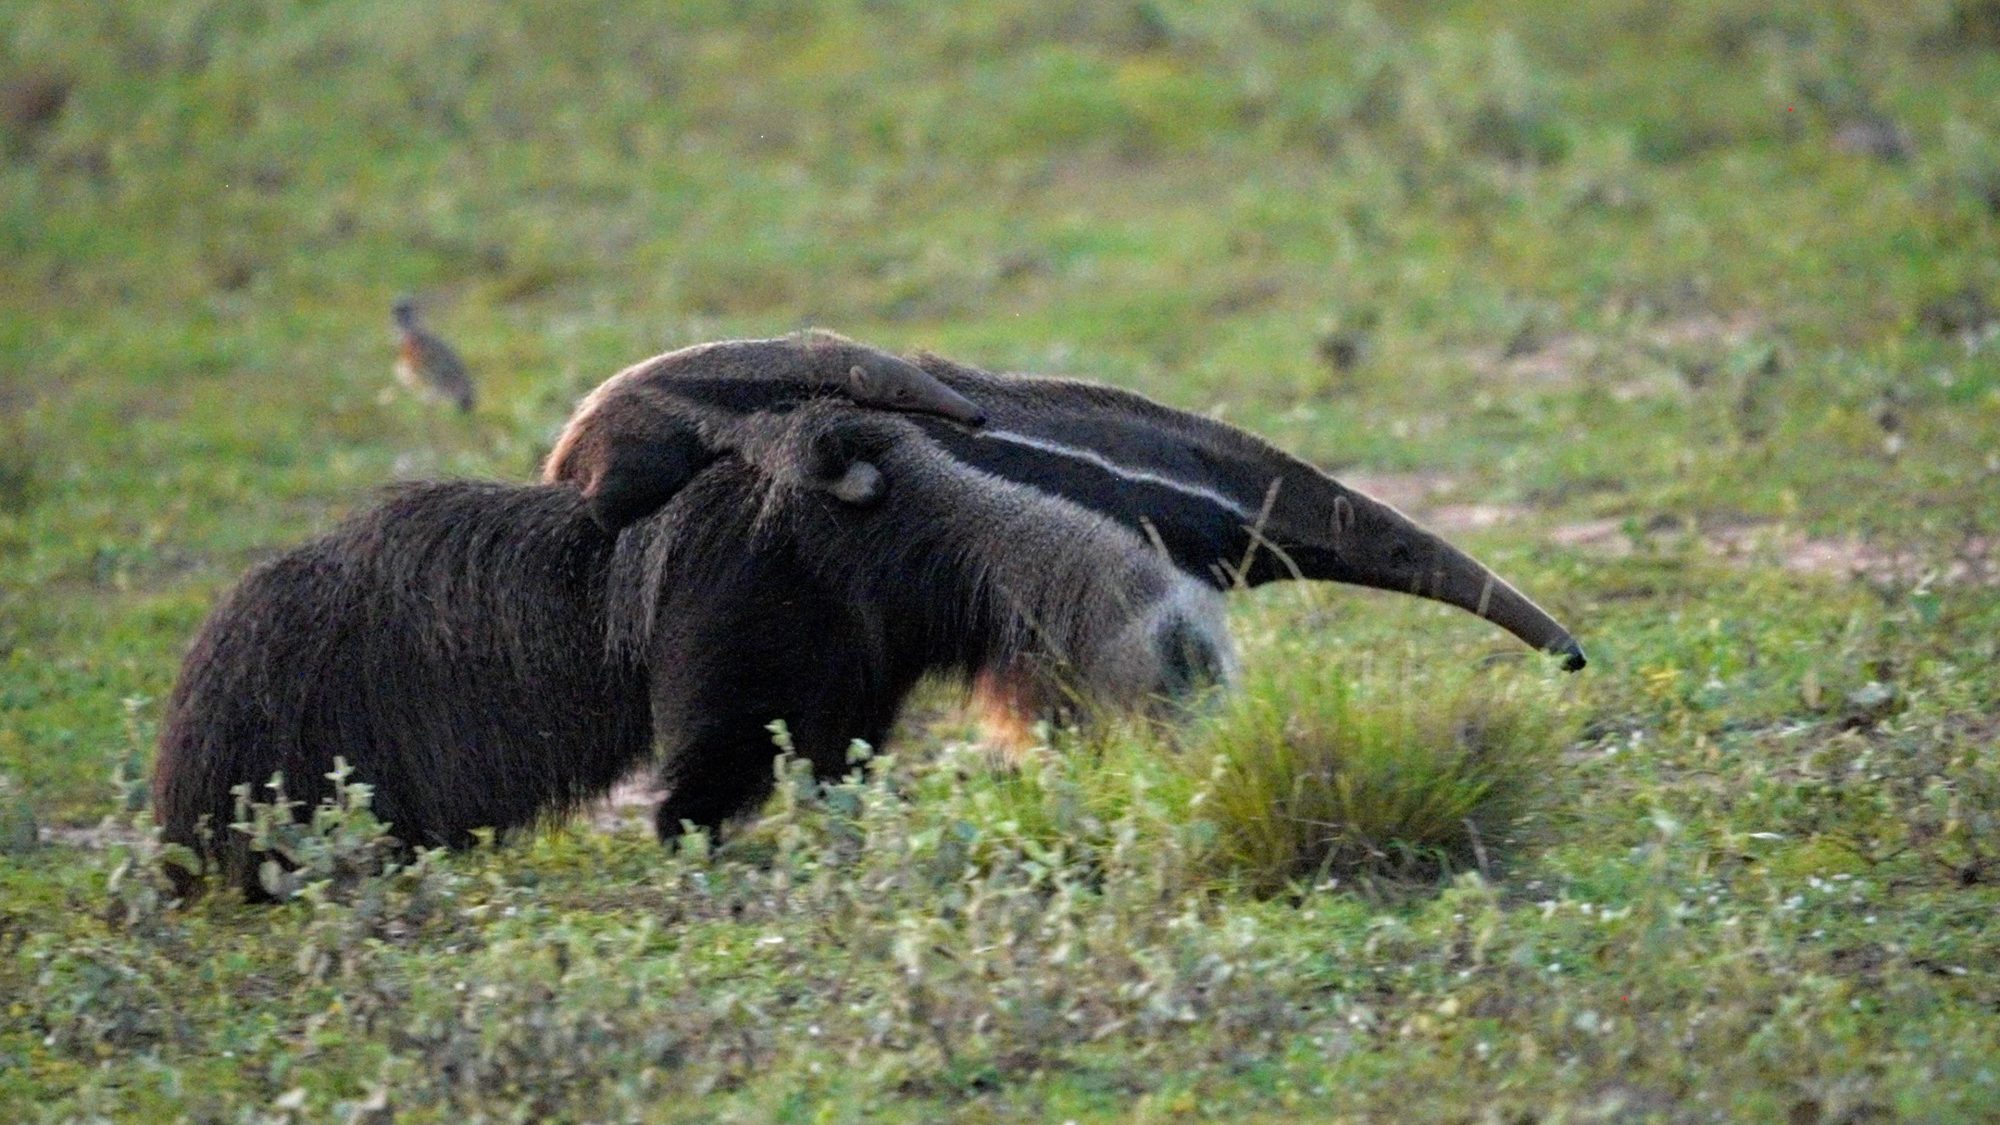 Giant Anteater with a baby on its back – Pantanal, Brazil 2022